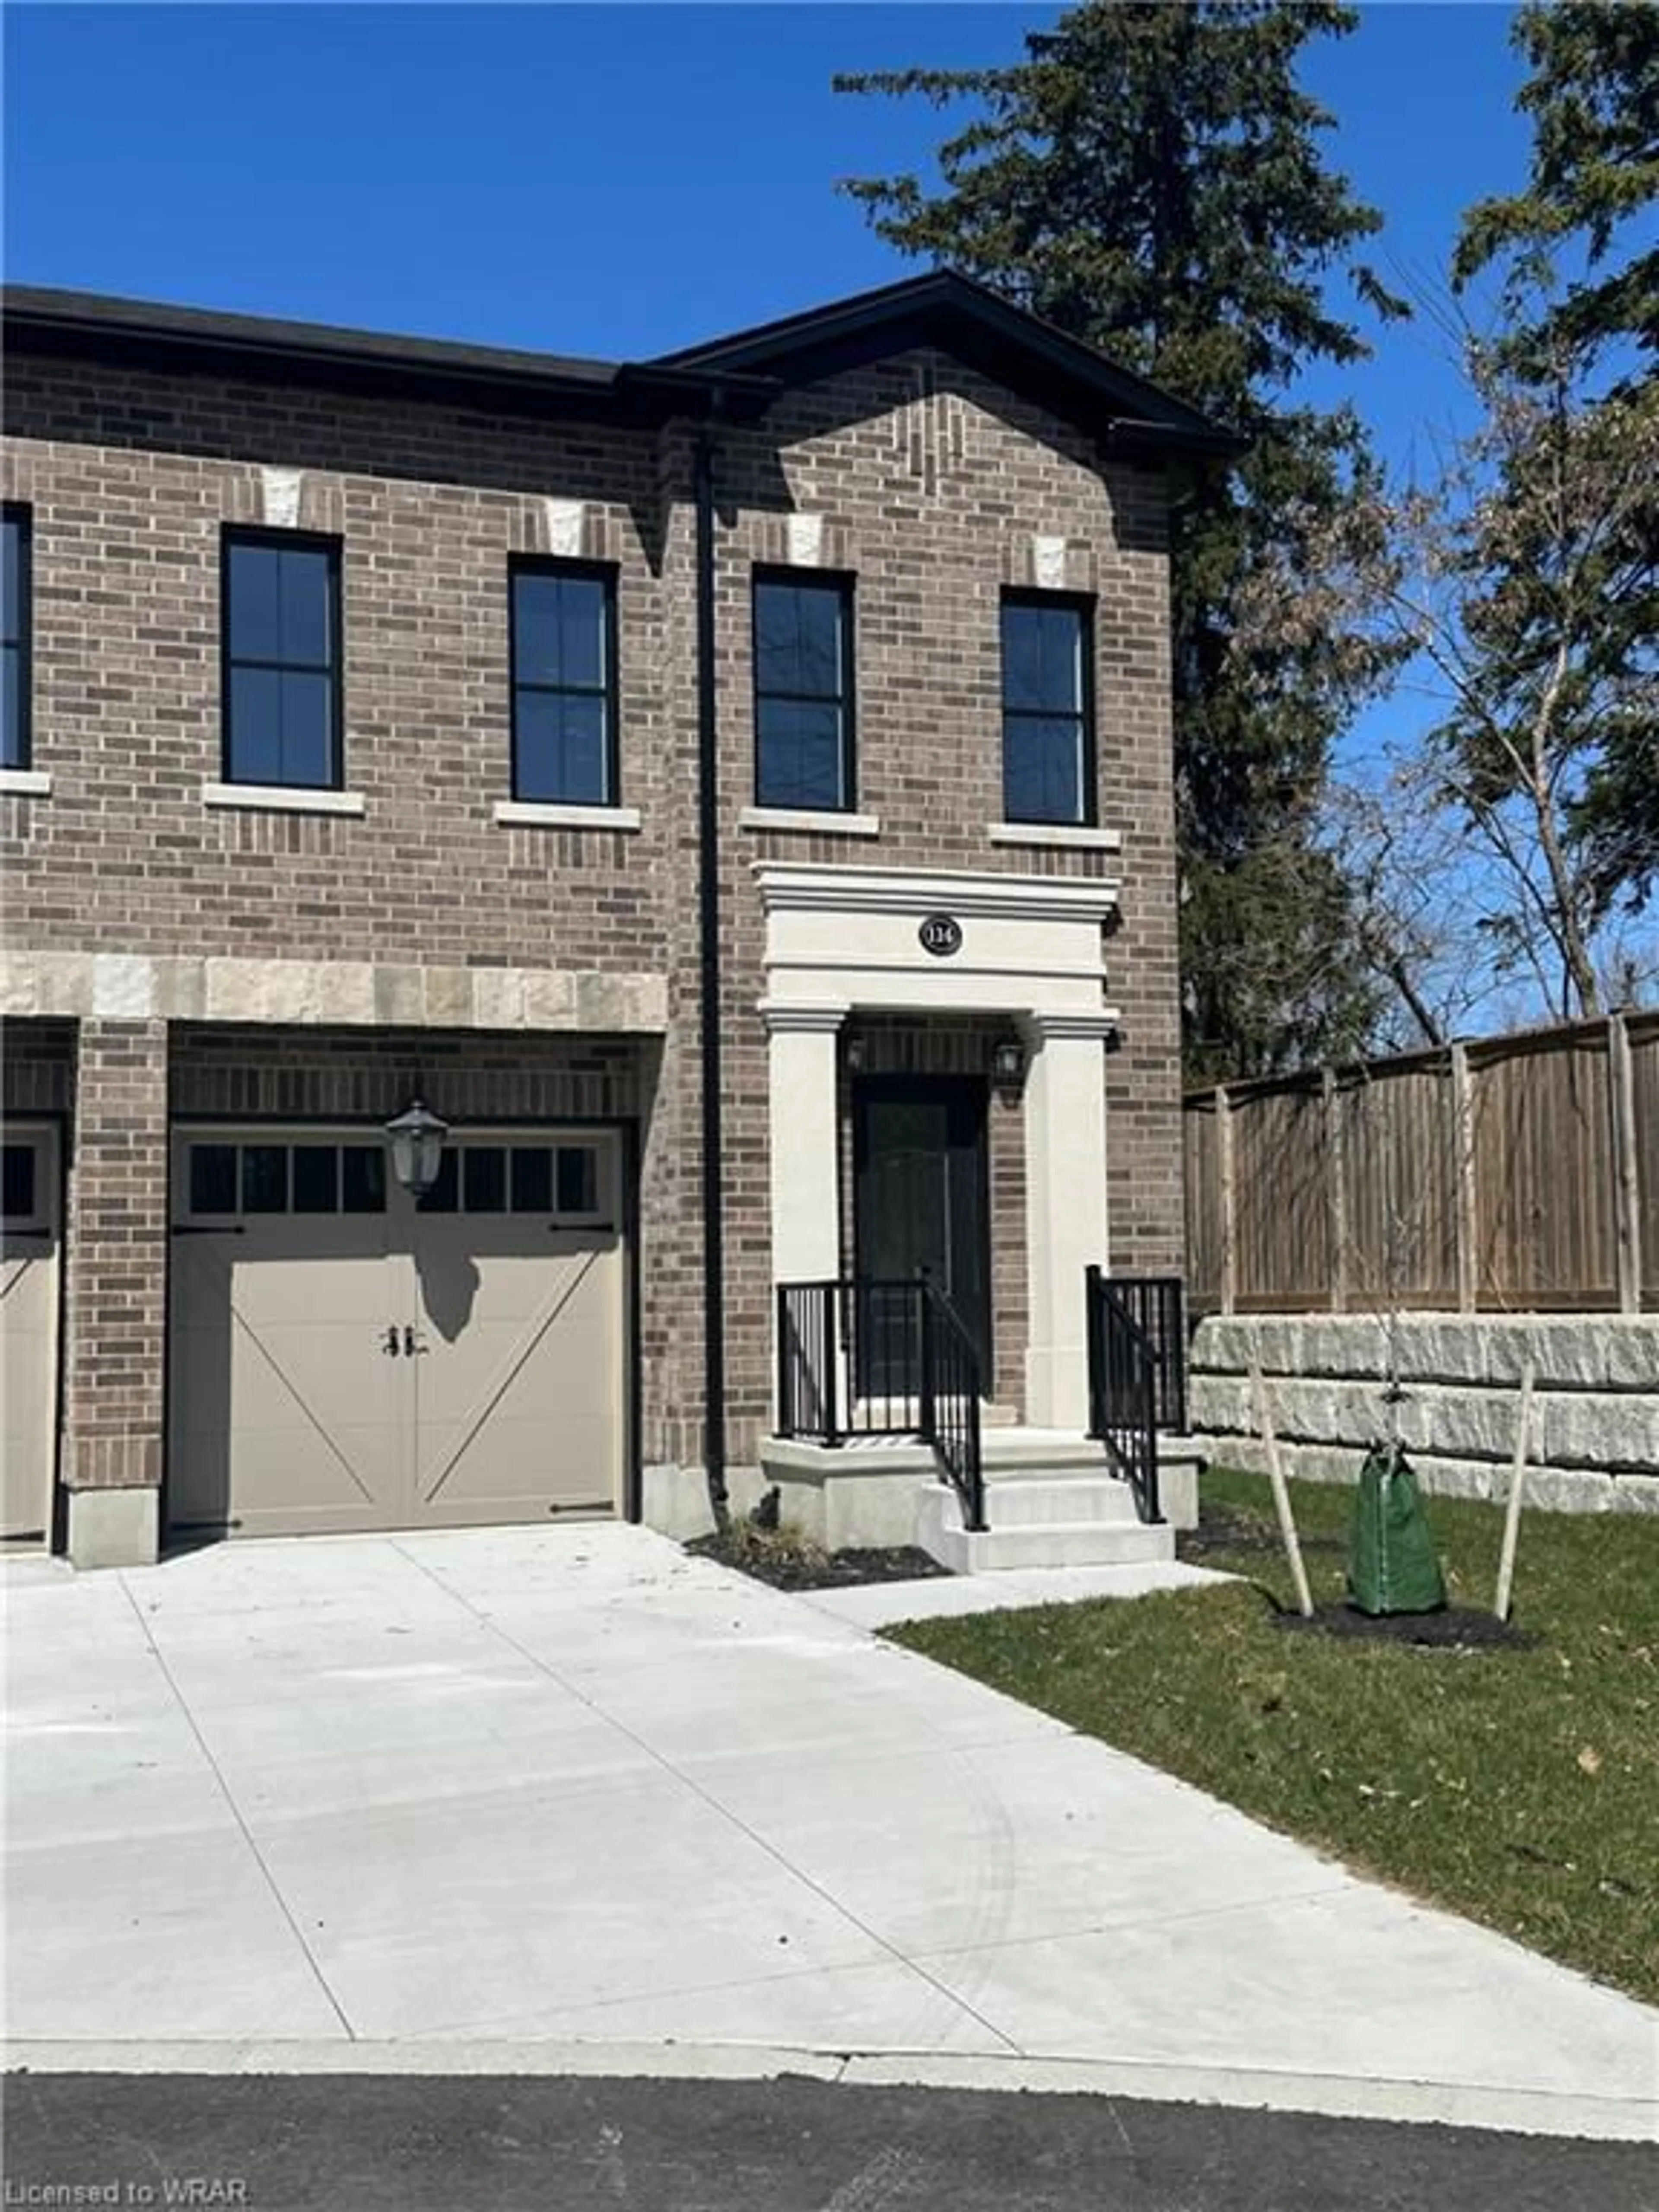 Home with brick exterior material for 362 Fairview St #102, New Hamburg Ontario N4A 1M2